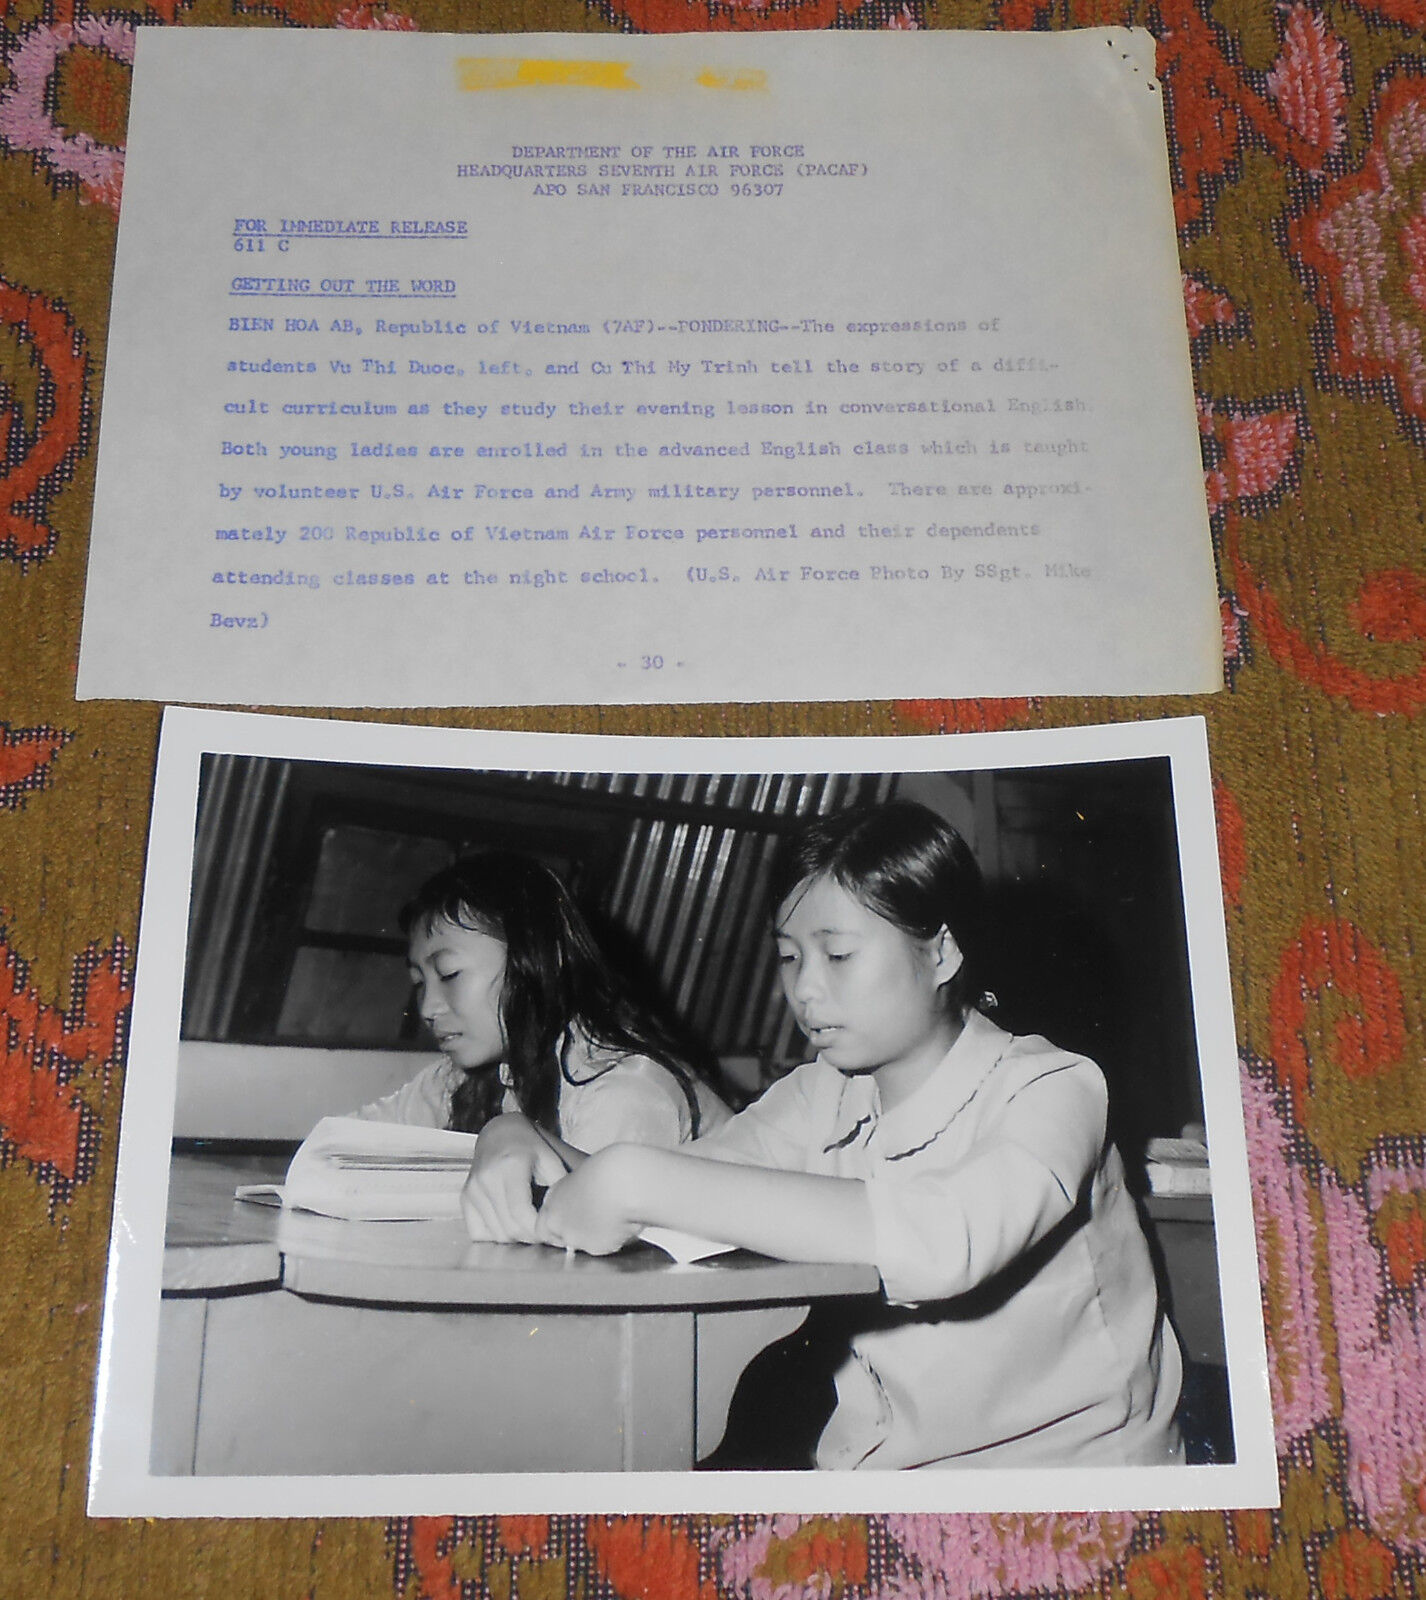 1970 USAF Press Release & Photo PACAF Vietnam Night School Students Young Girls